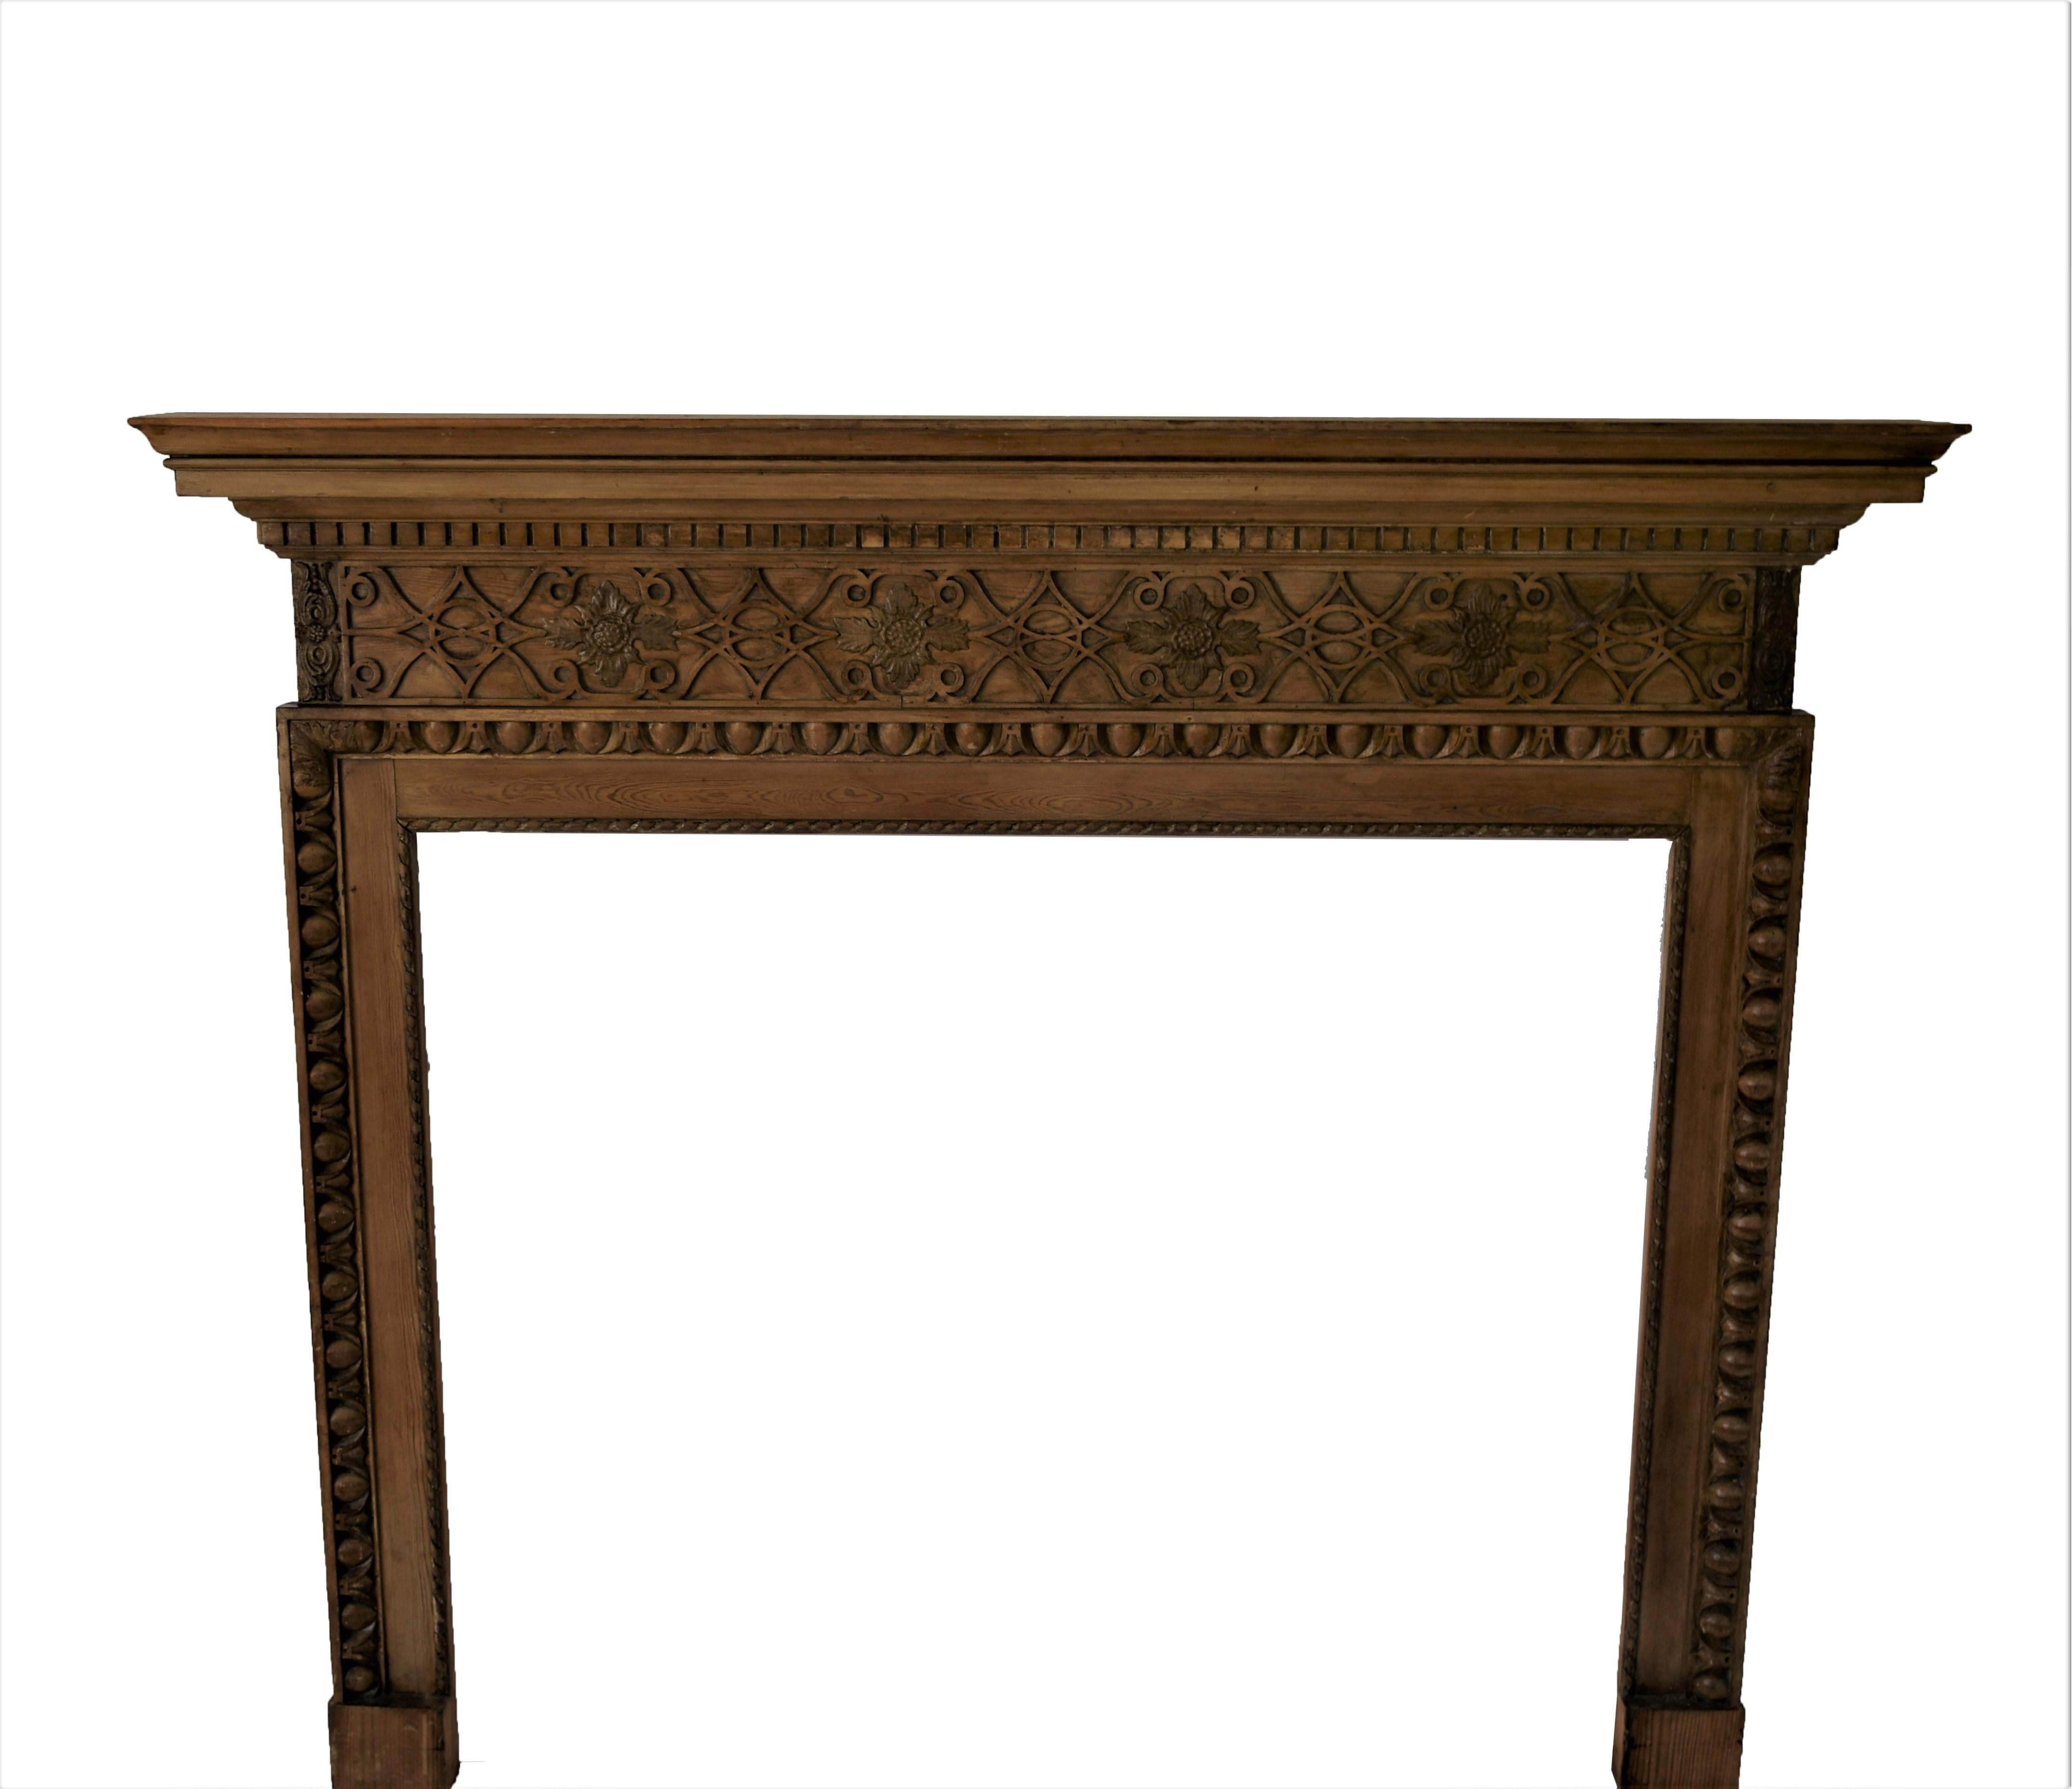 Interesting Vintage English made traditional hand carved fire surround mantel with fret work carved frieze surmounted by a dentil carved cornice. Egg & dart moulding surrounds the opening. Hand rubbed and waxed finish.

Overall - 59 1/2